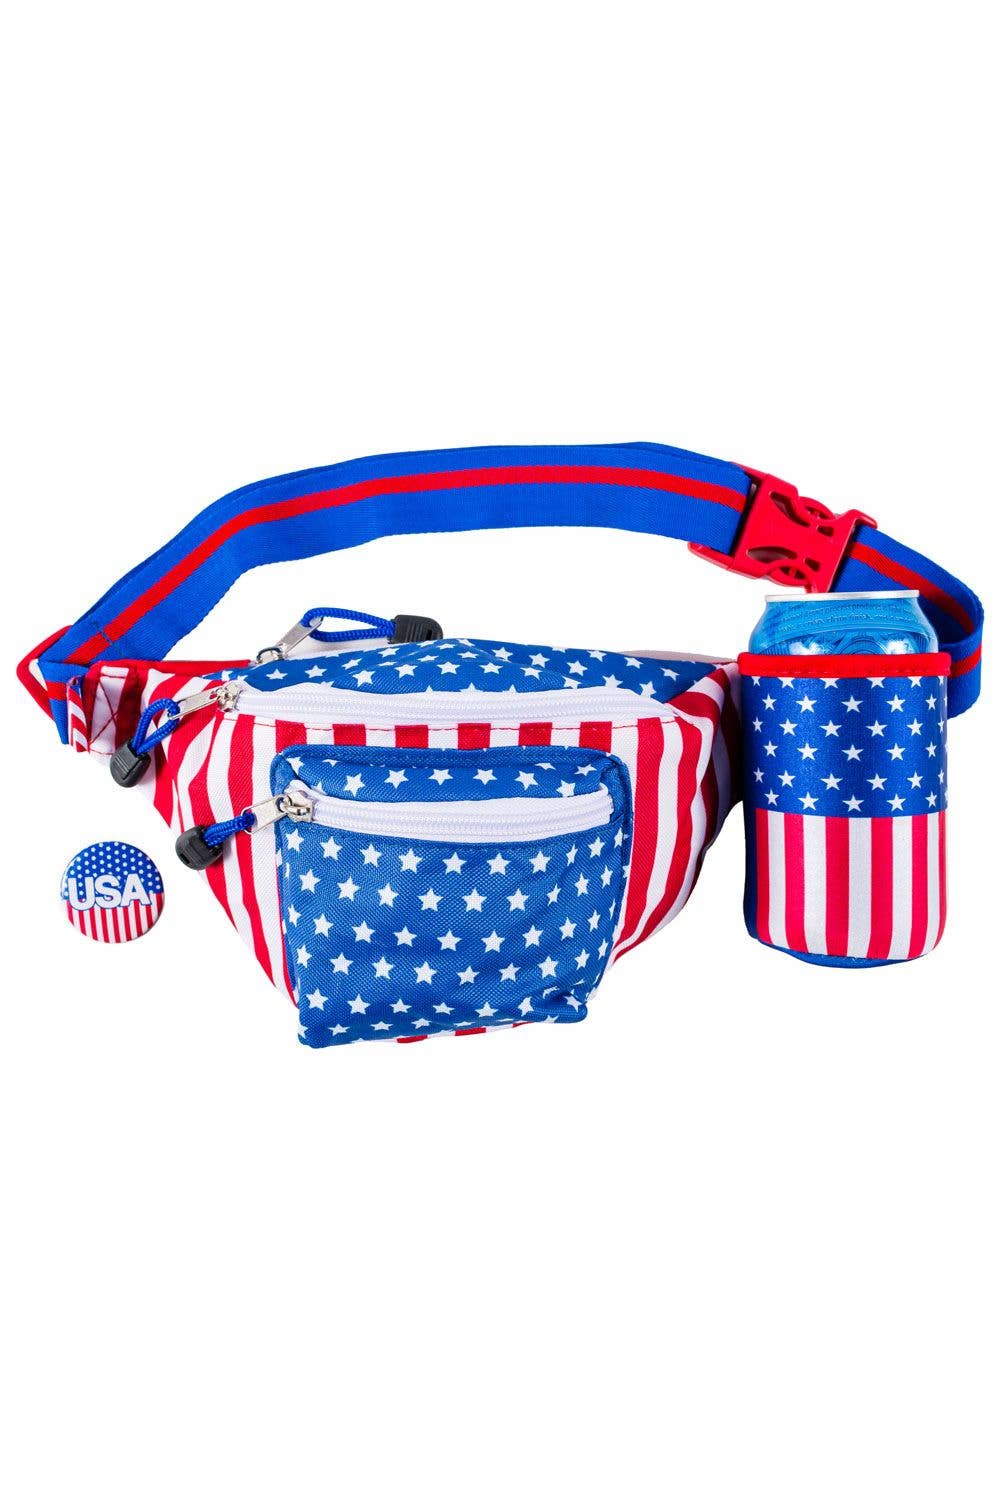 Freedom American Flag Fanny Pack Accessory w/ Drink Holder